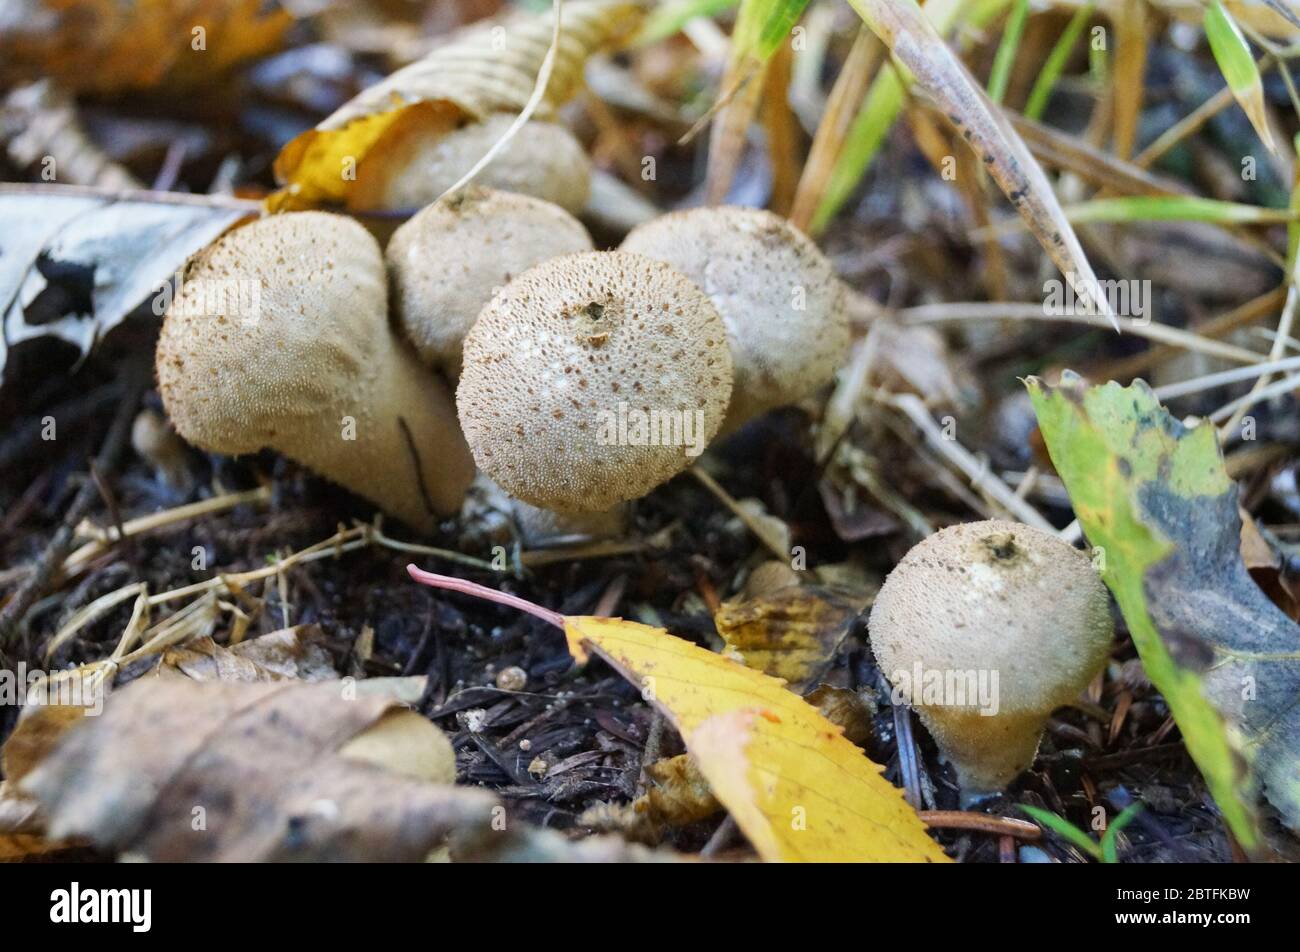 Lycoperdon mushroom with a white hat in a pimple and a white leg grows in a forest in fallen leaves Stock Photo